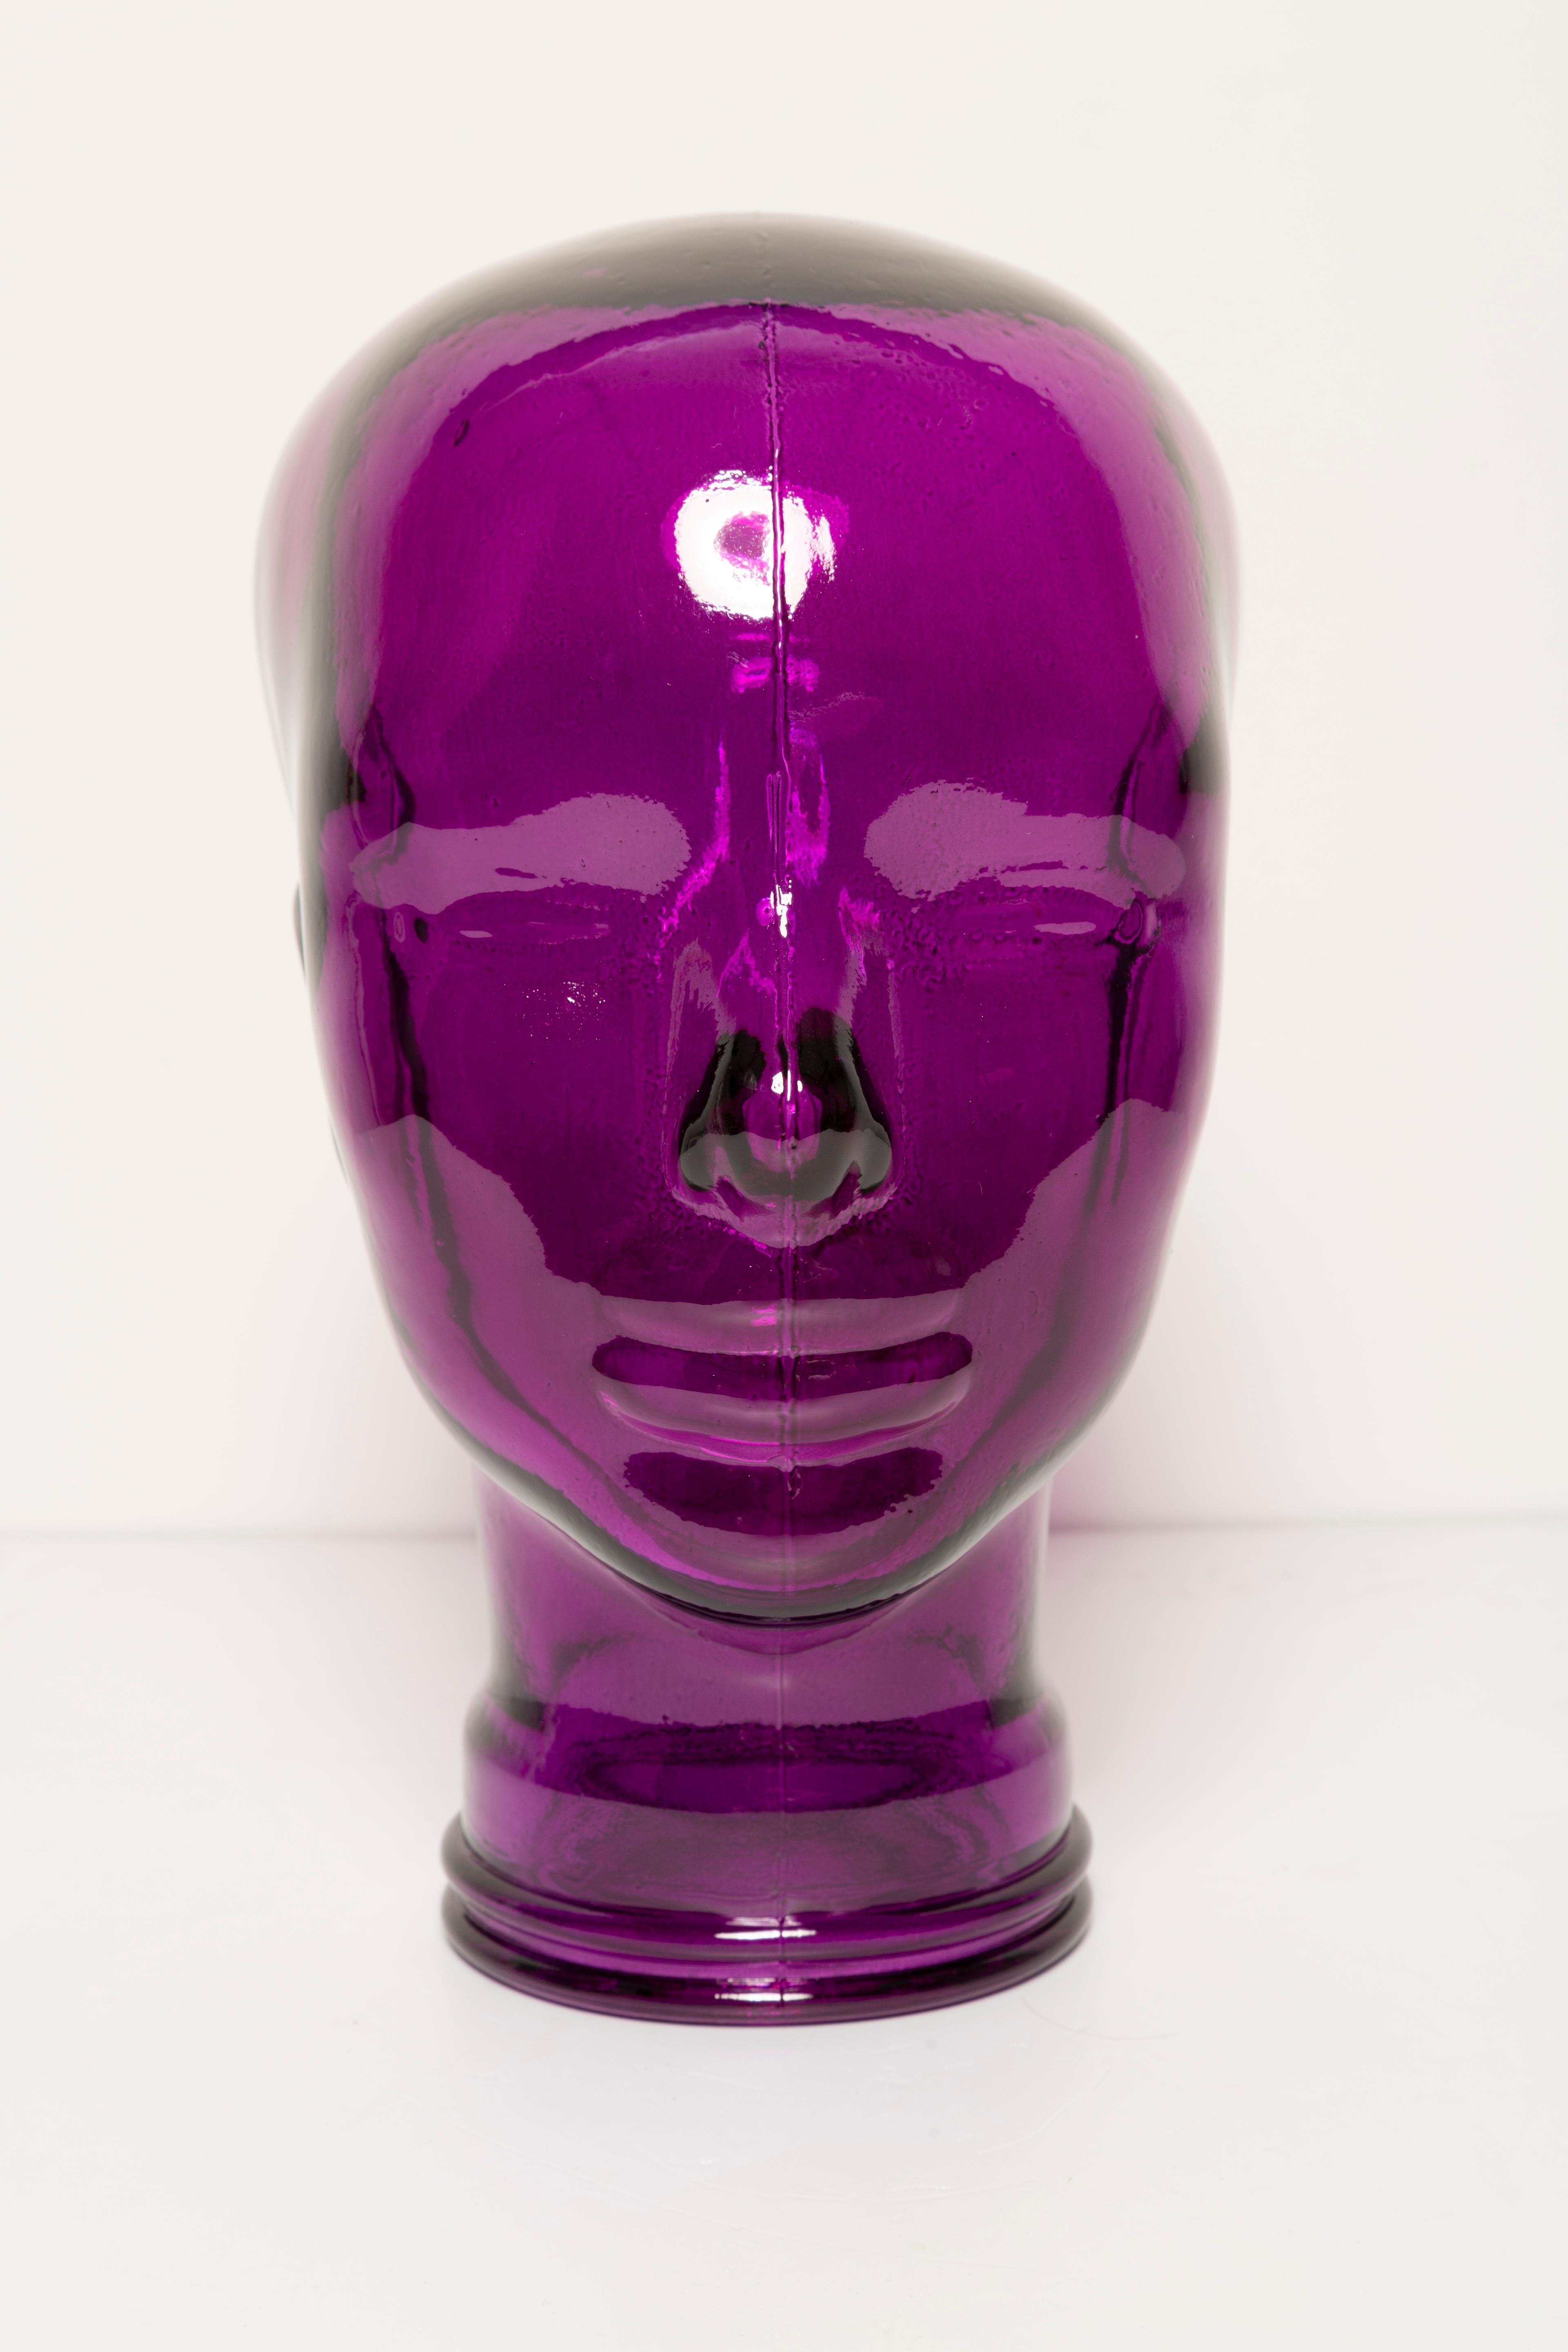 Life-size glass head in a unique purple color. Produced in a German steelworks in the 1970s. Perfect condition. A perfect addition to the interior, photo prop, display or headphone stand.